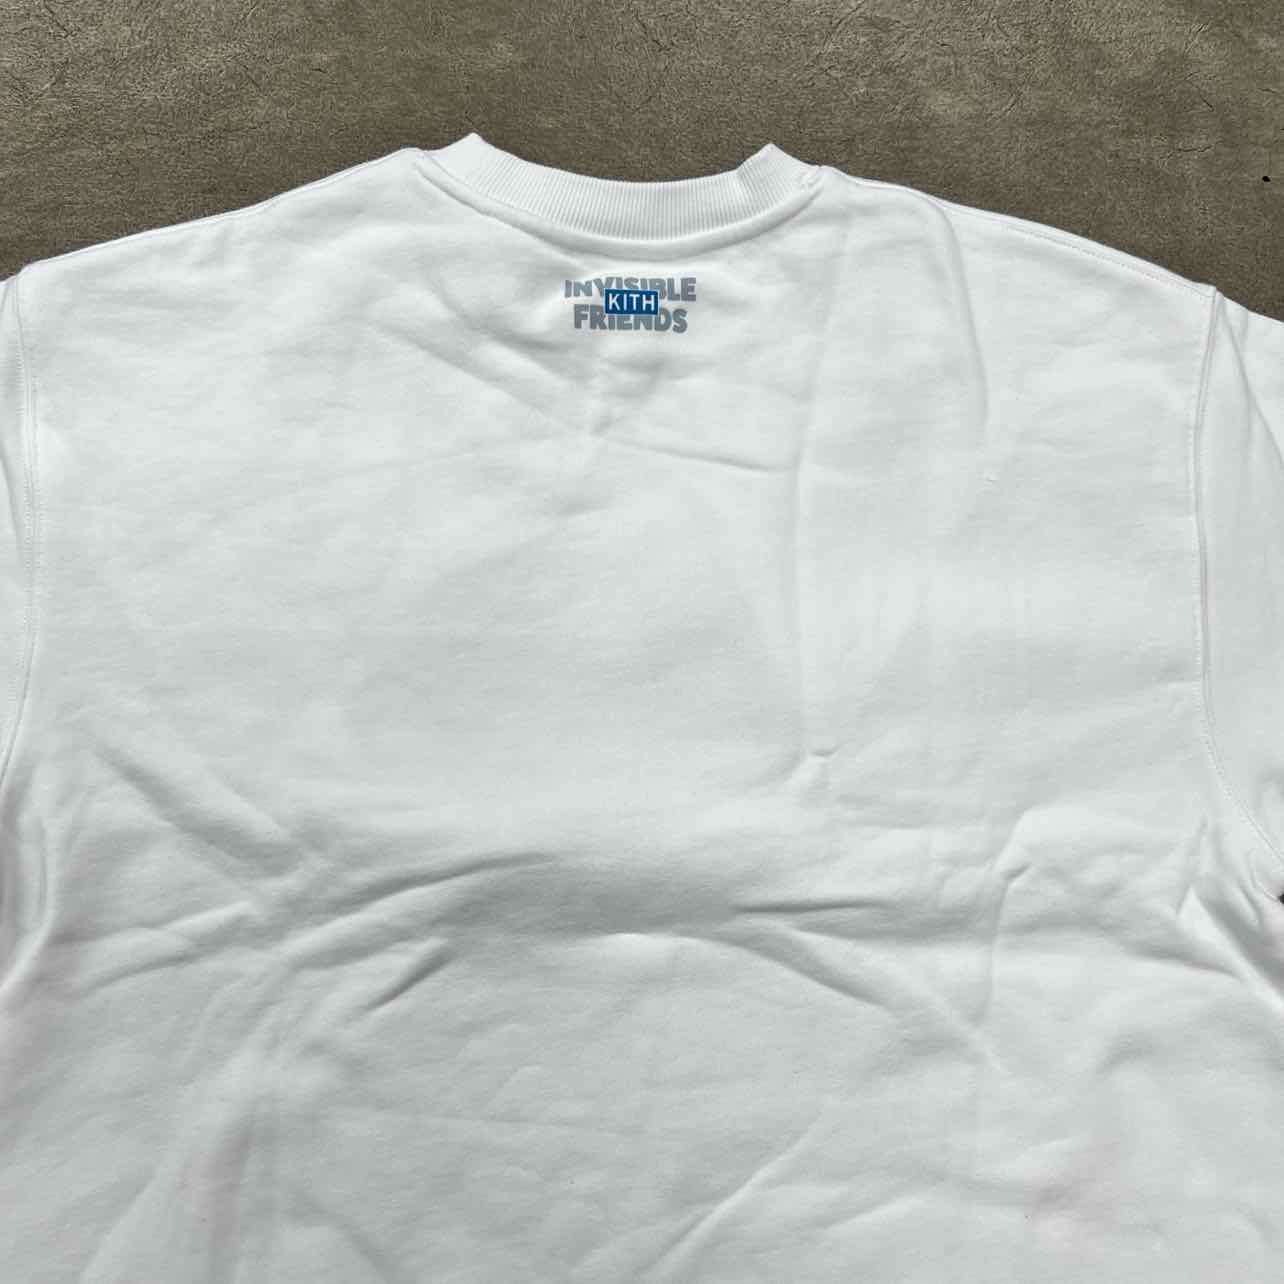 Kith Crewneck Sweater &quot;INVISIBLE FRIENDS&quot; White New Size M